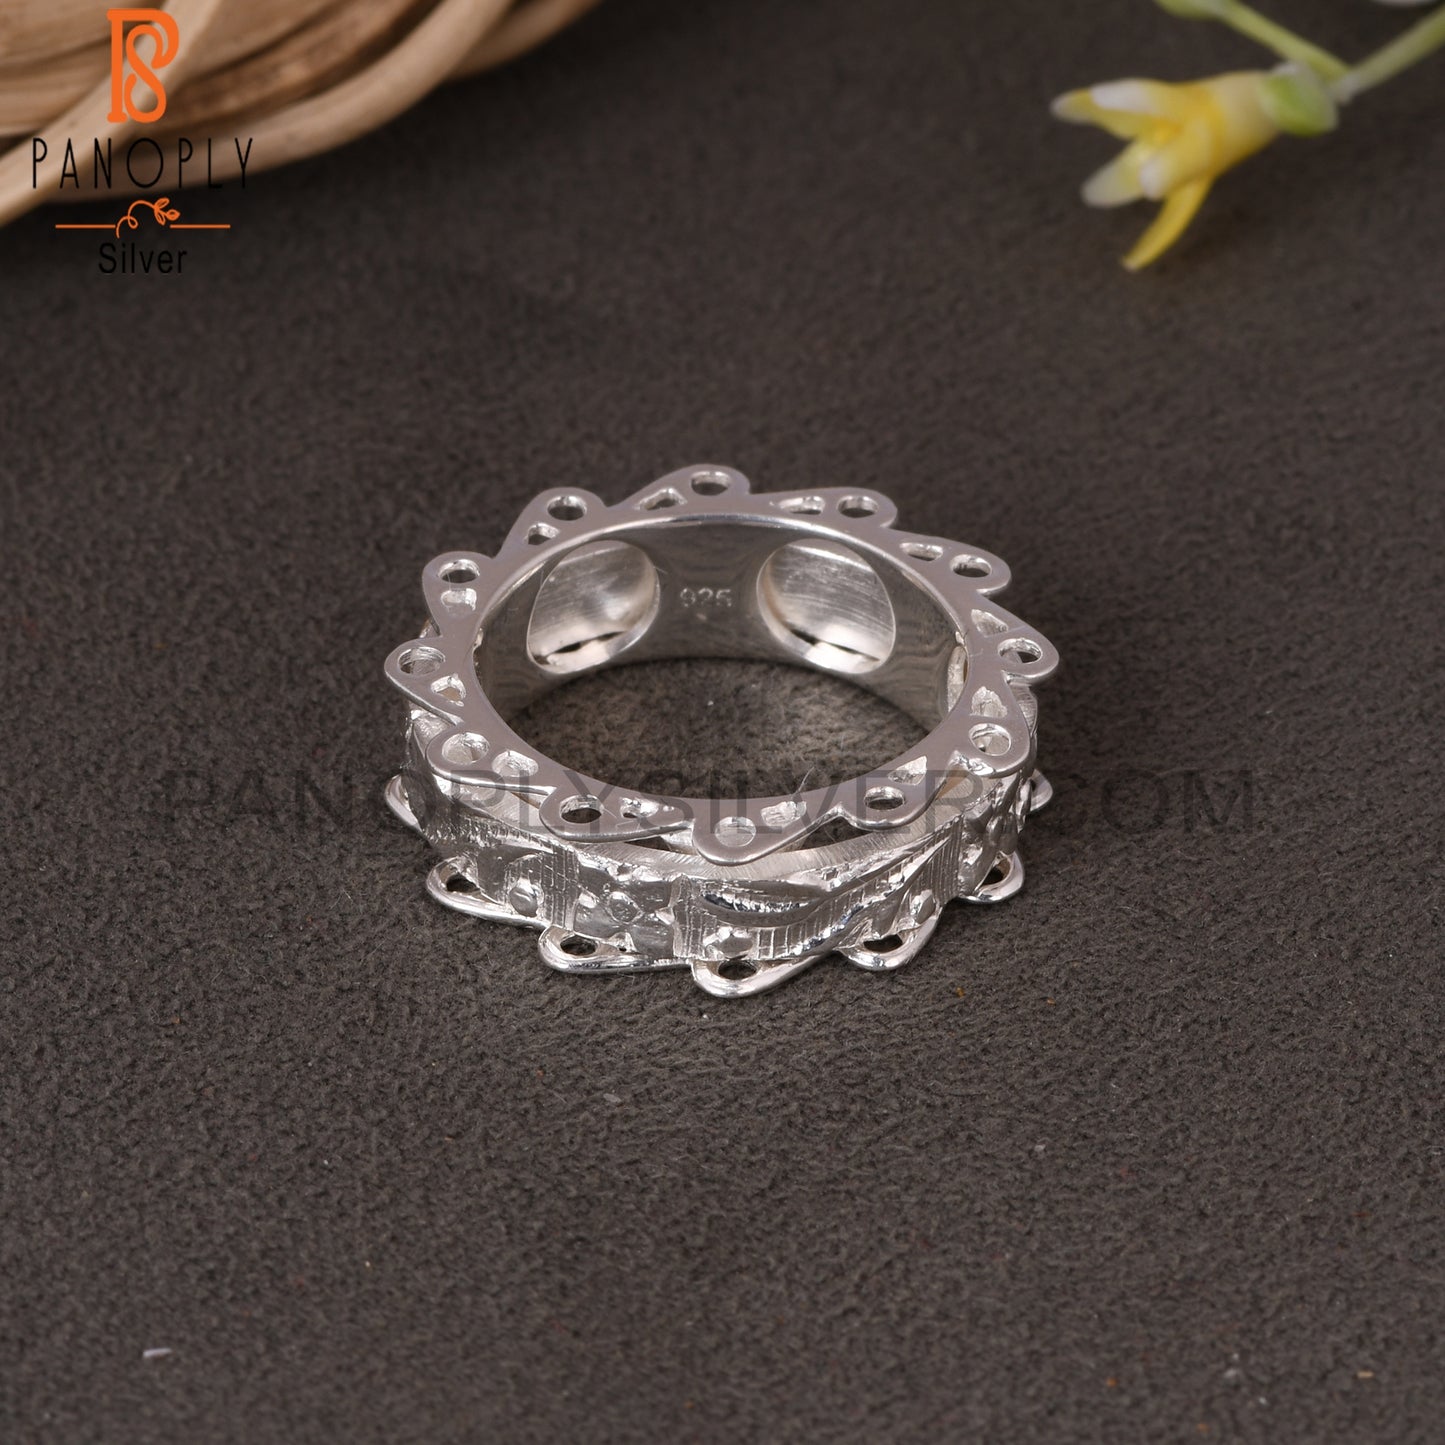 Handmade 925 Sterling Silver Floral Pattern Ring